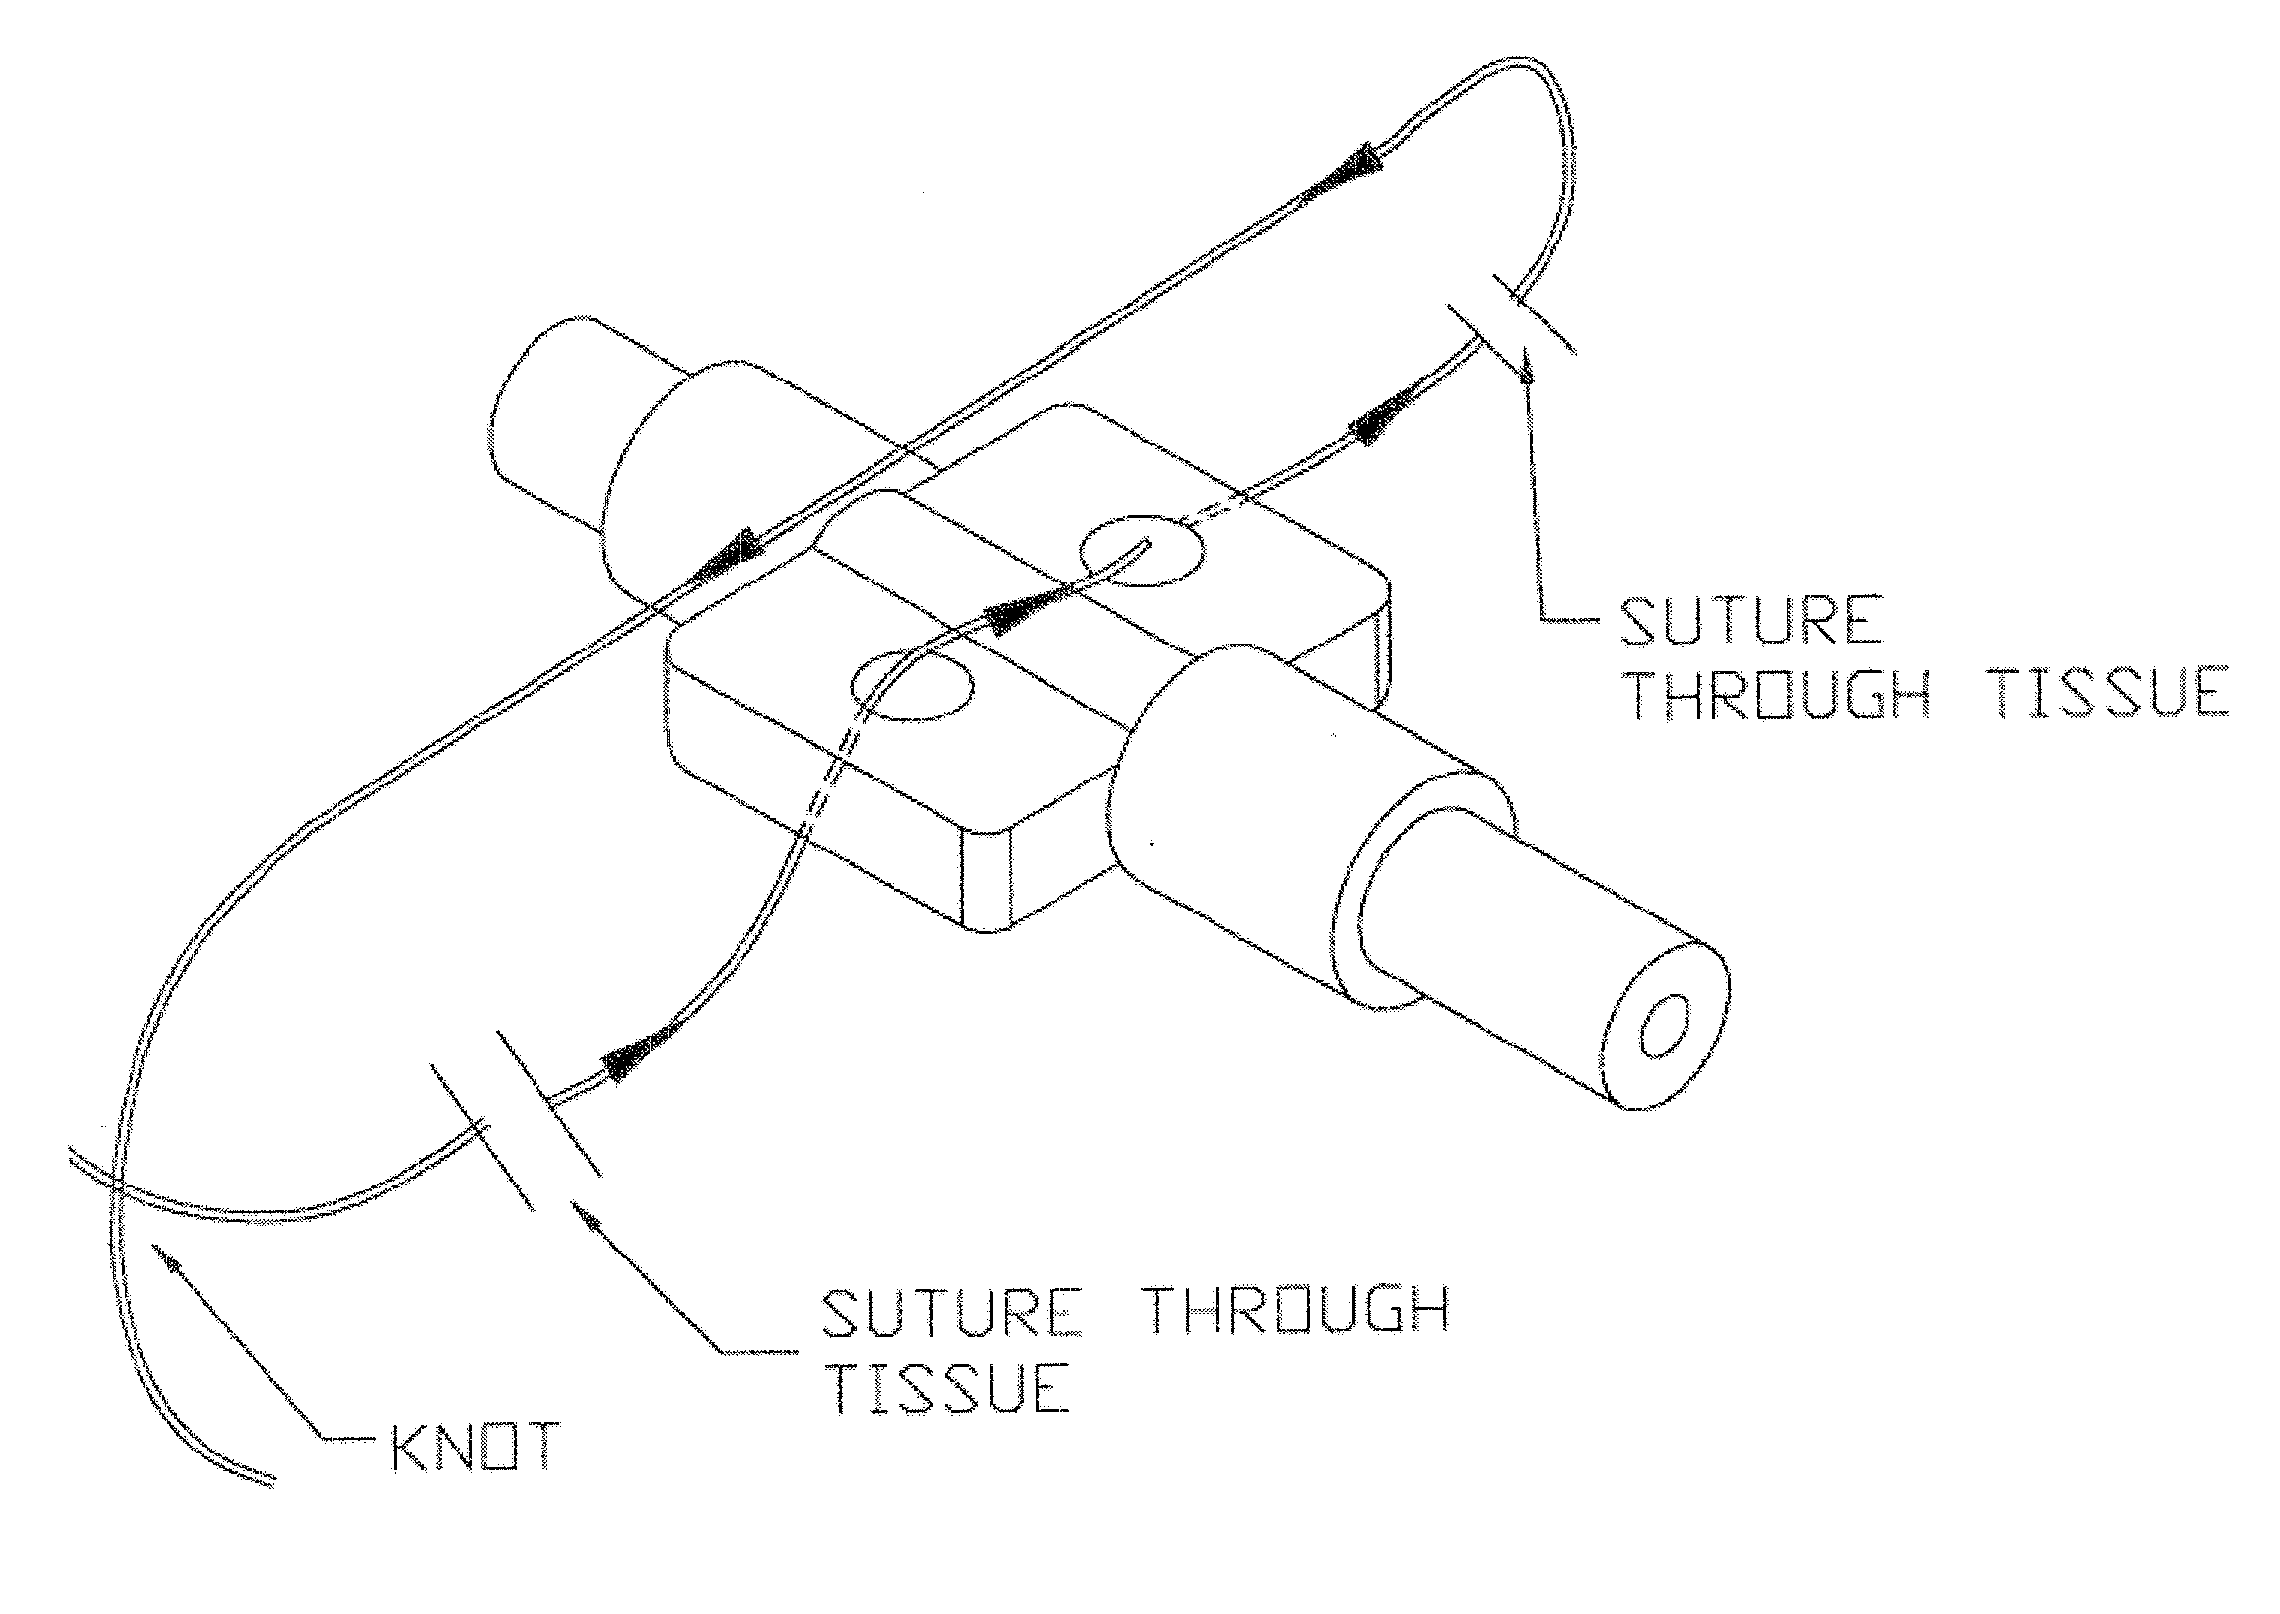 Implant Device for Use in Salivary Gland Duct